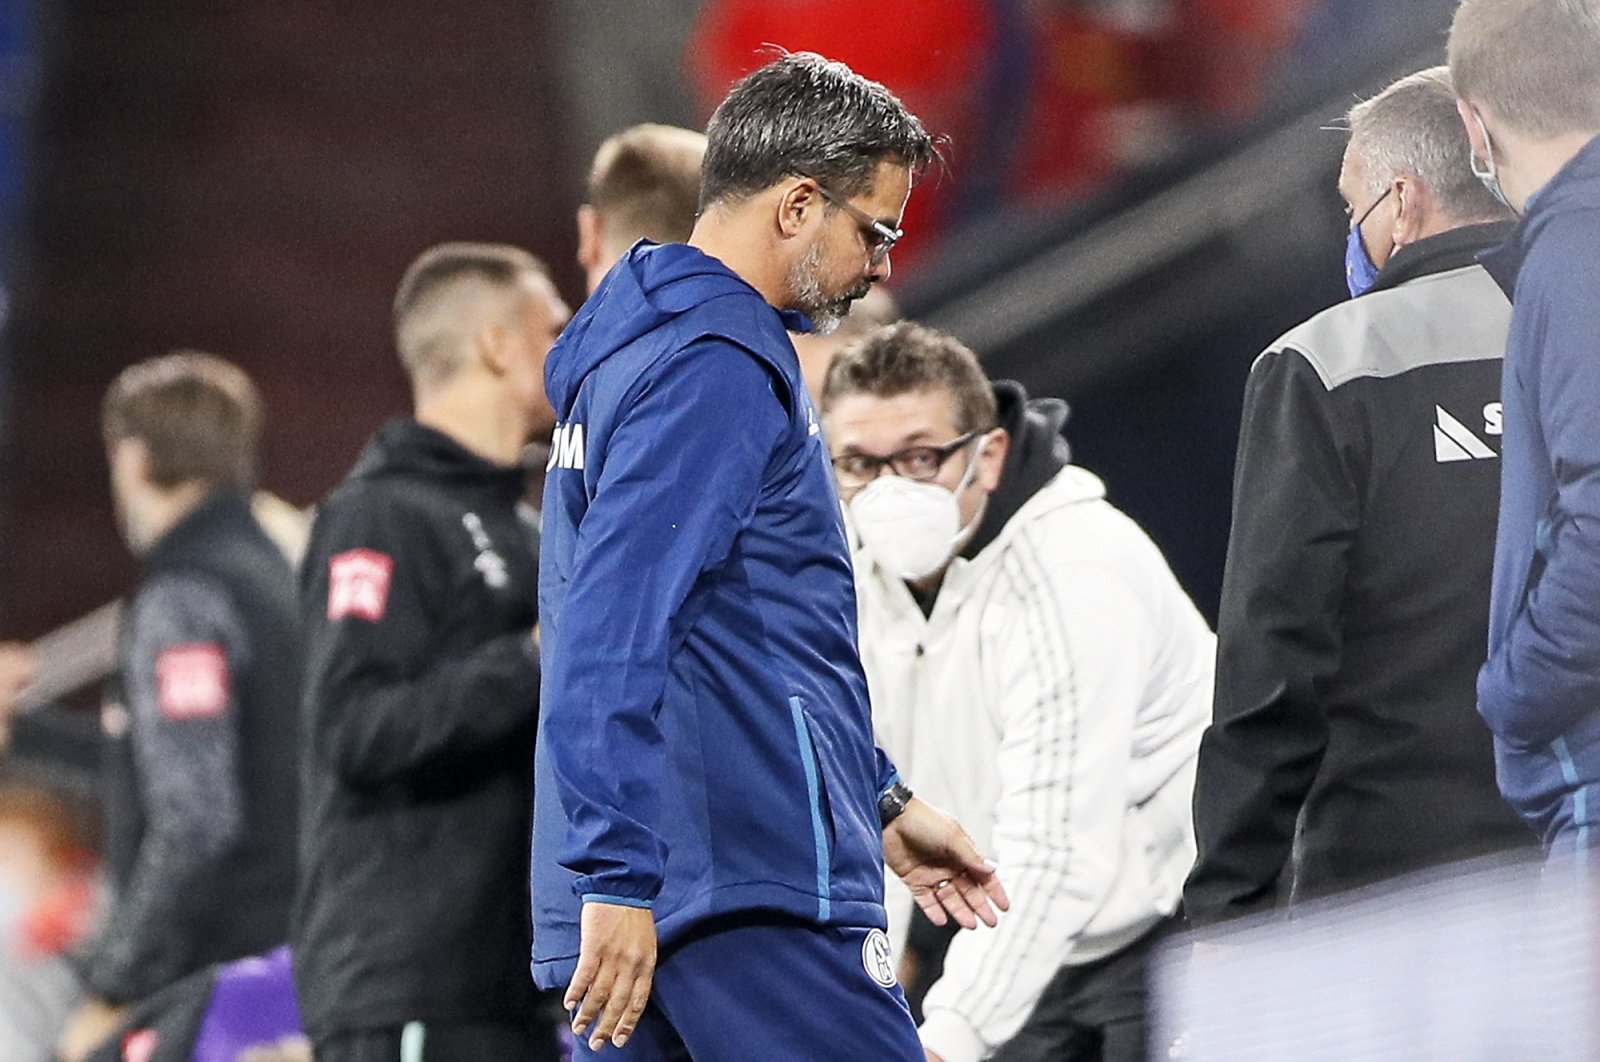 Coach David Wagner leaves the pitch after a match between Schalke and Werder Bremen, in Gelsenkirchen, Germany, Sept. 26, 2020. (AP Photo)